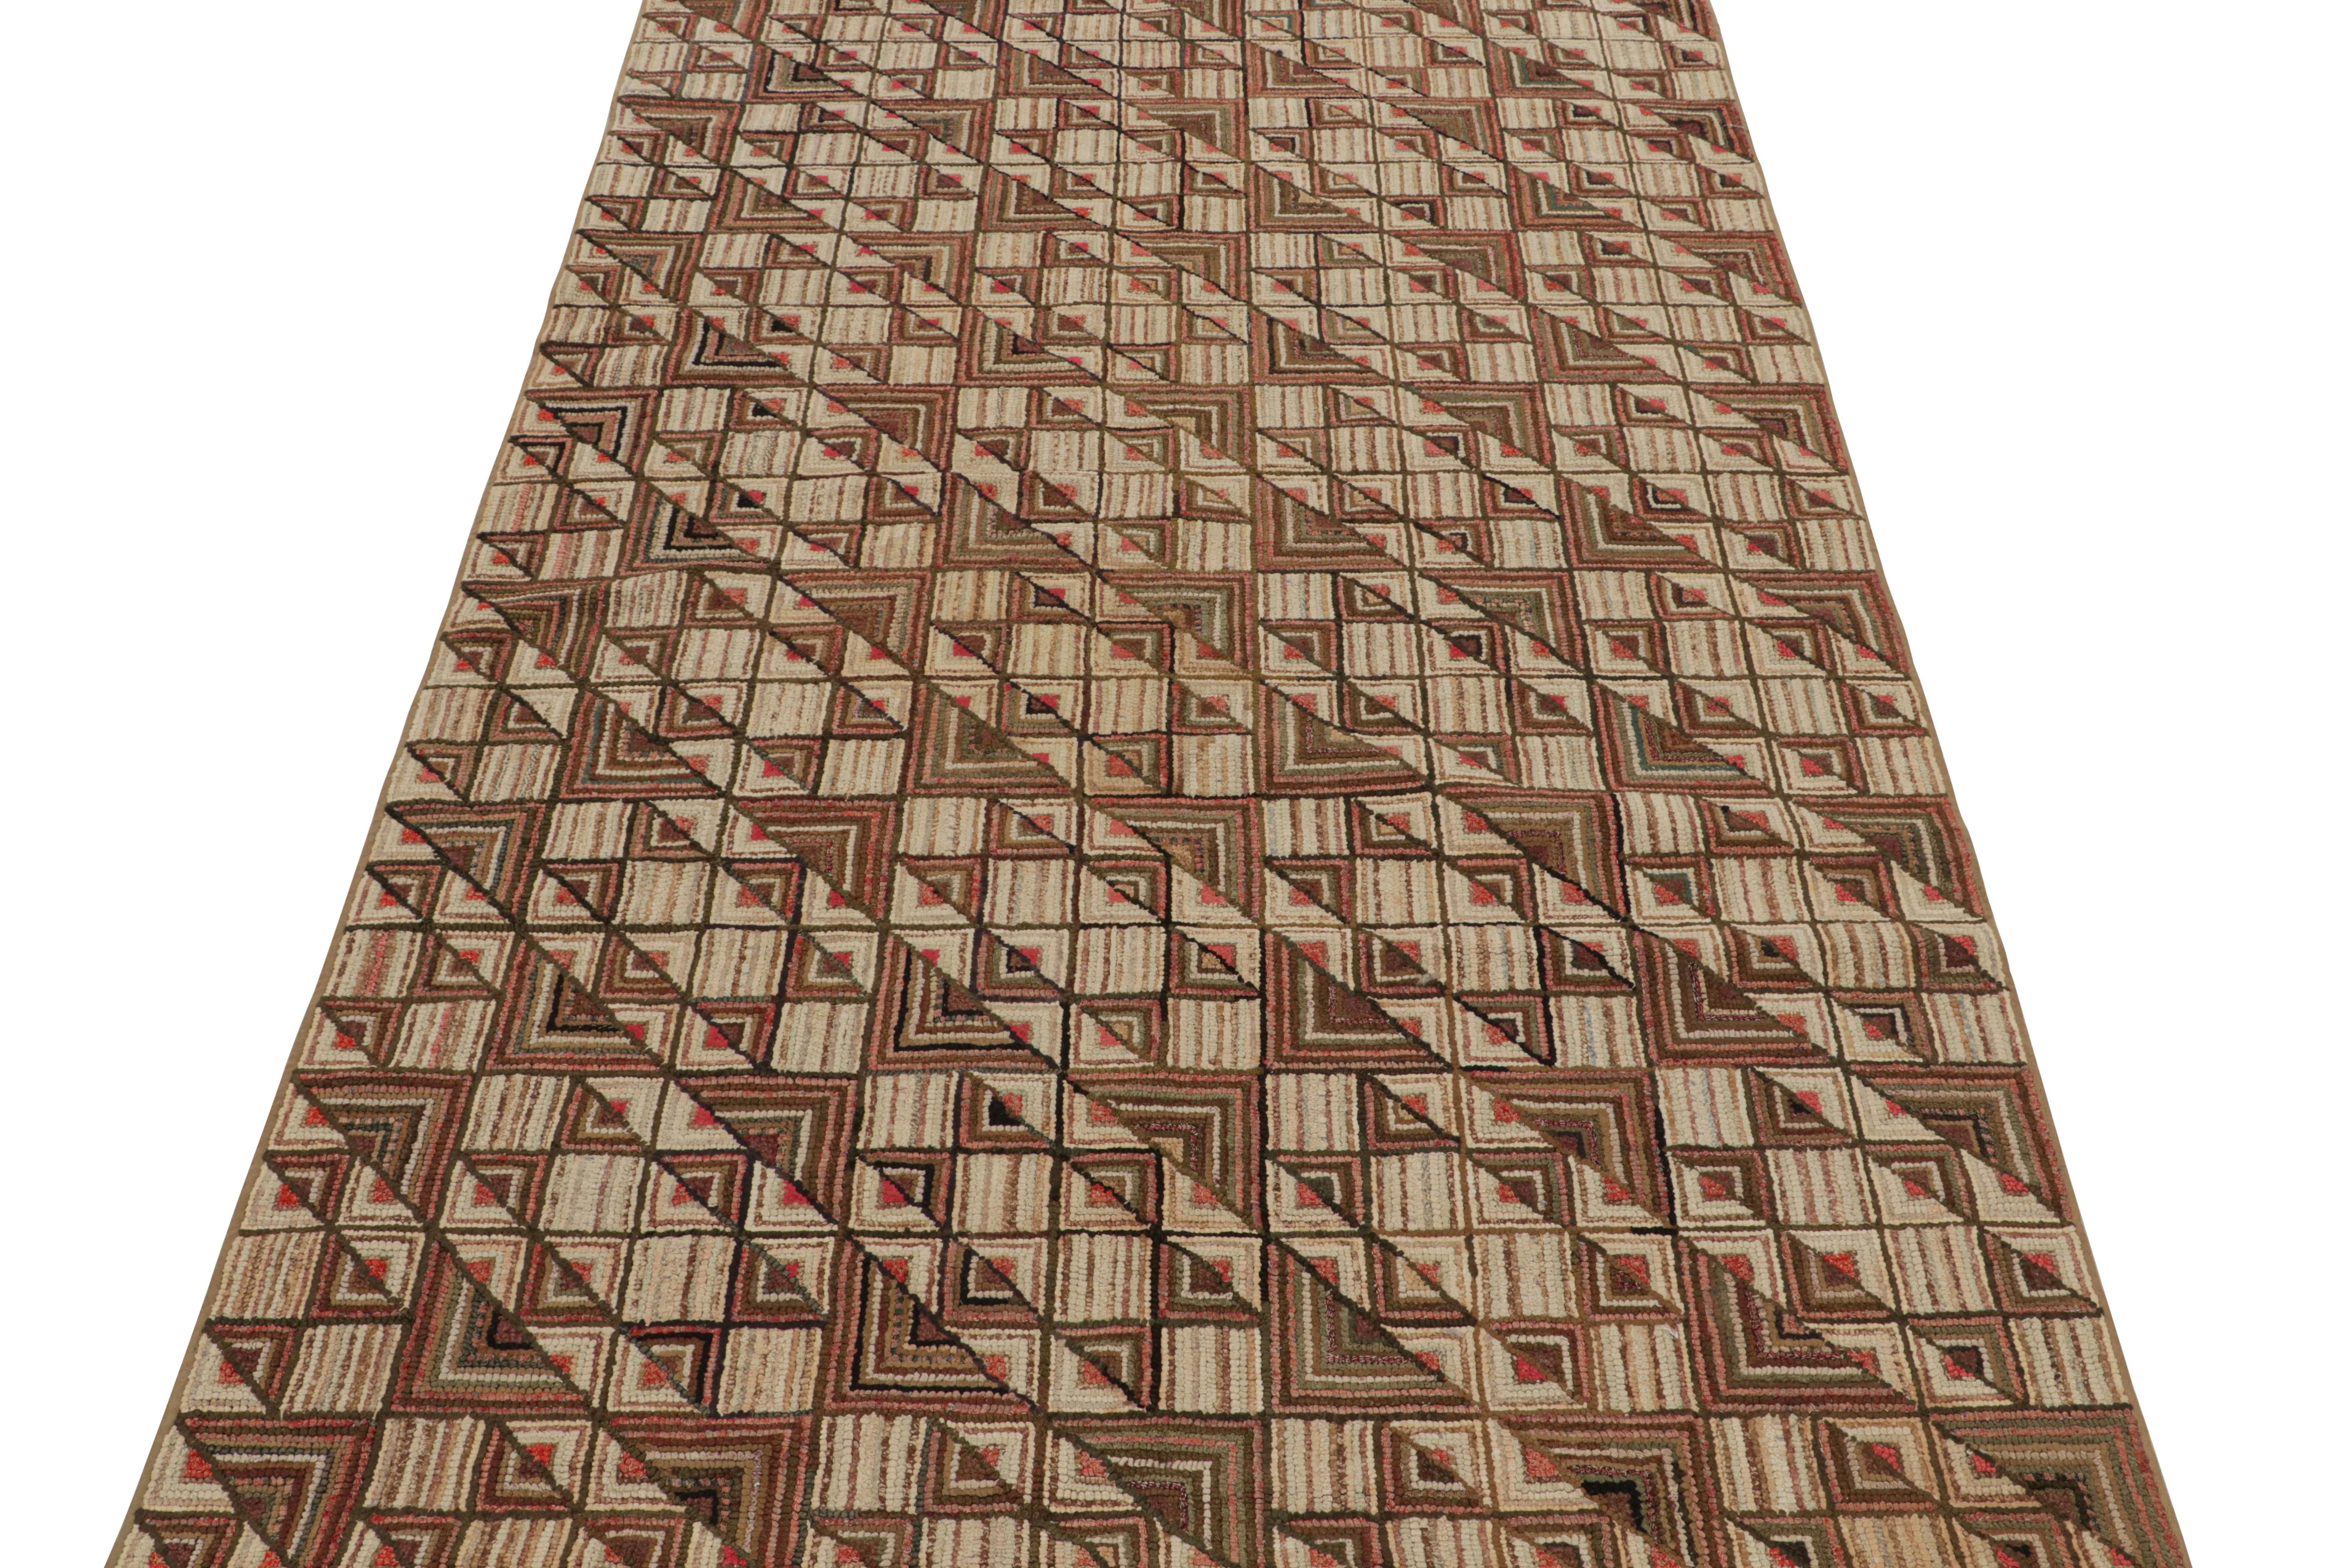 American Antique Hooked Rug with Beige-Brown Geometric Patterns, from Rug & Kilim For Sale